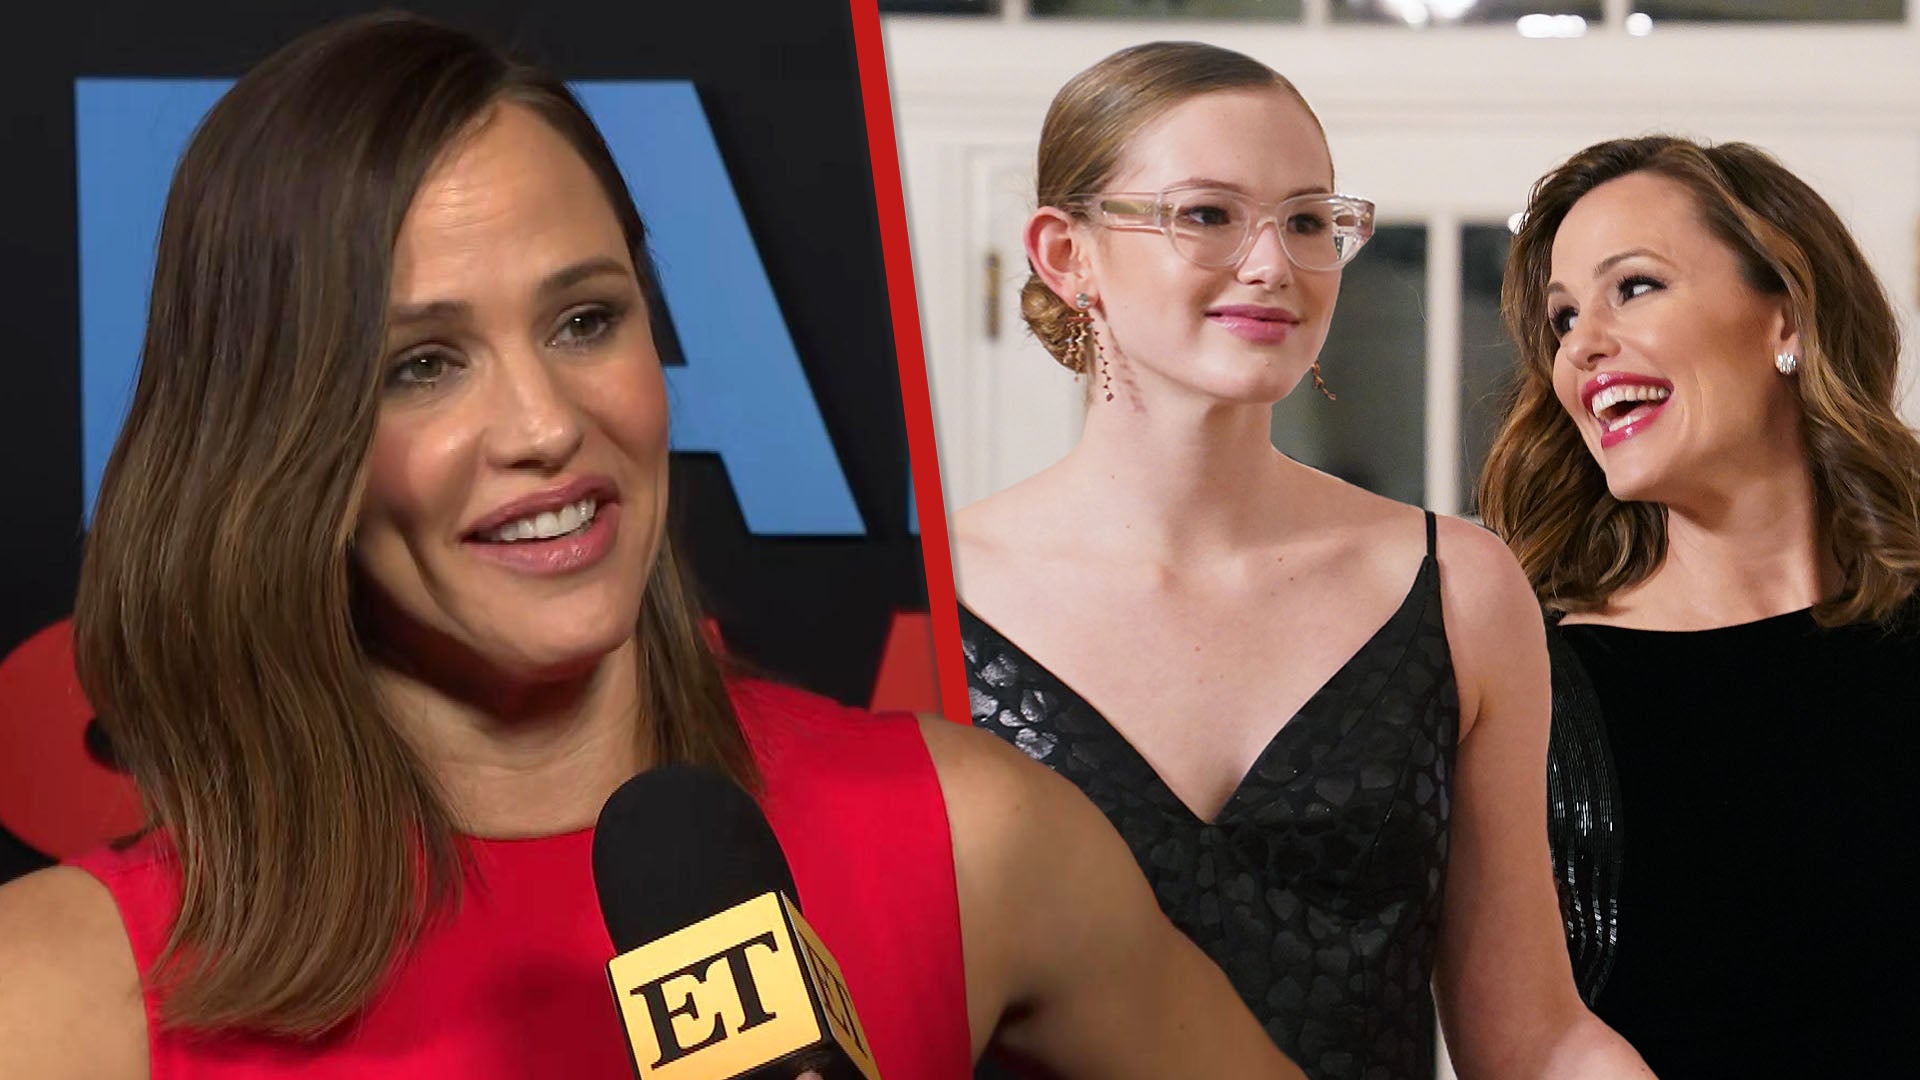 Jennifer Garner on Her Kids Teaching Her ‘Humility’ and How Teens Are ‘Hard Work’ (Exclusive)